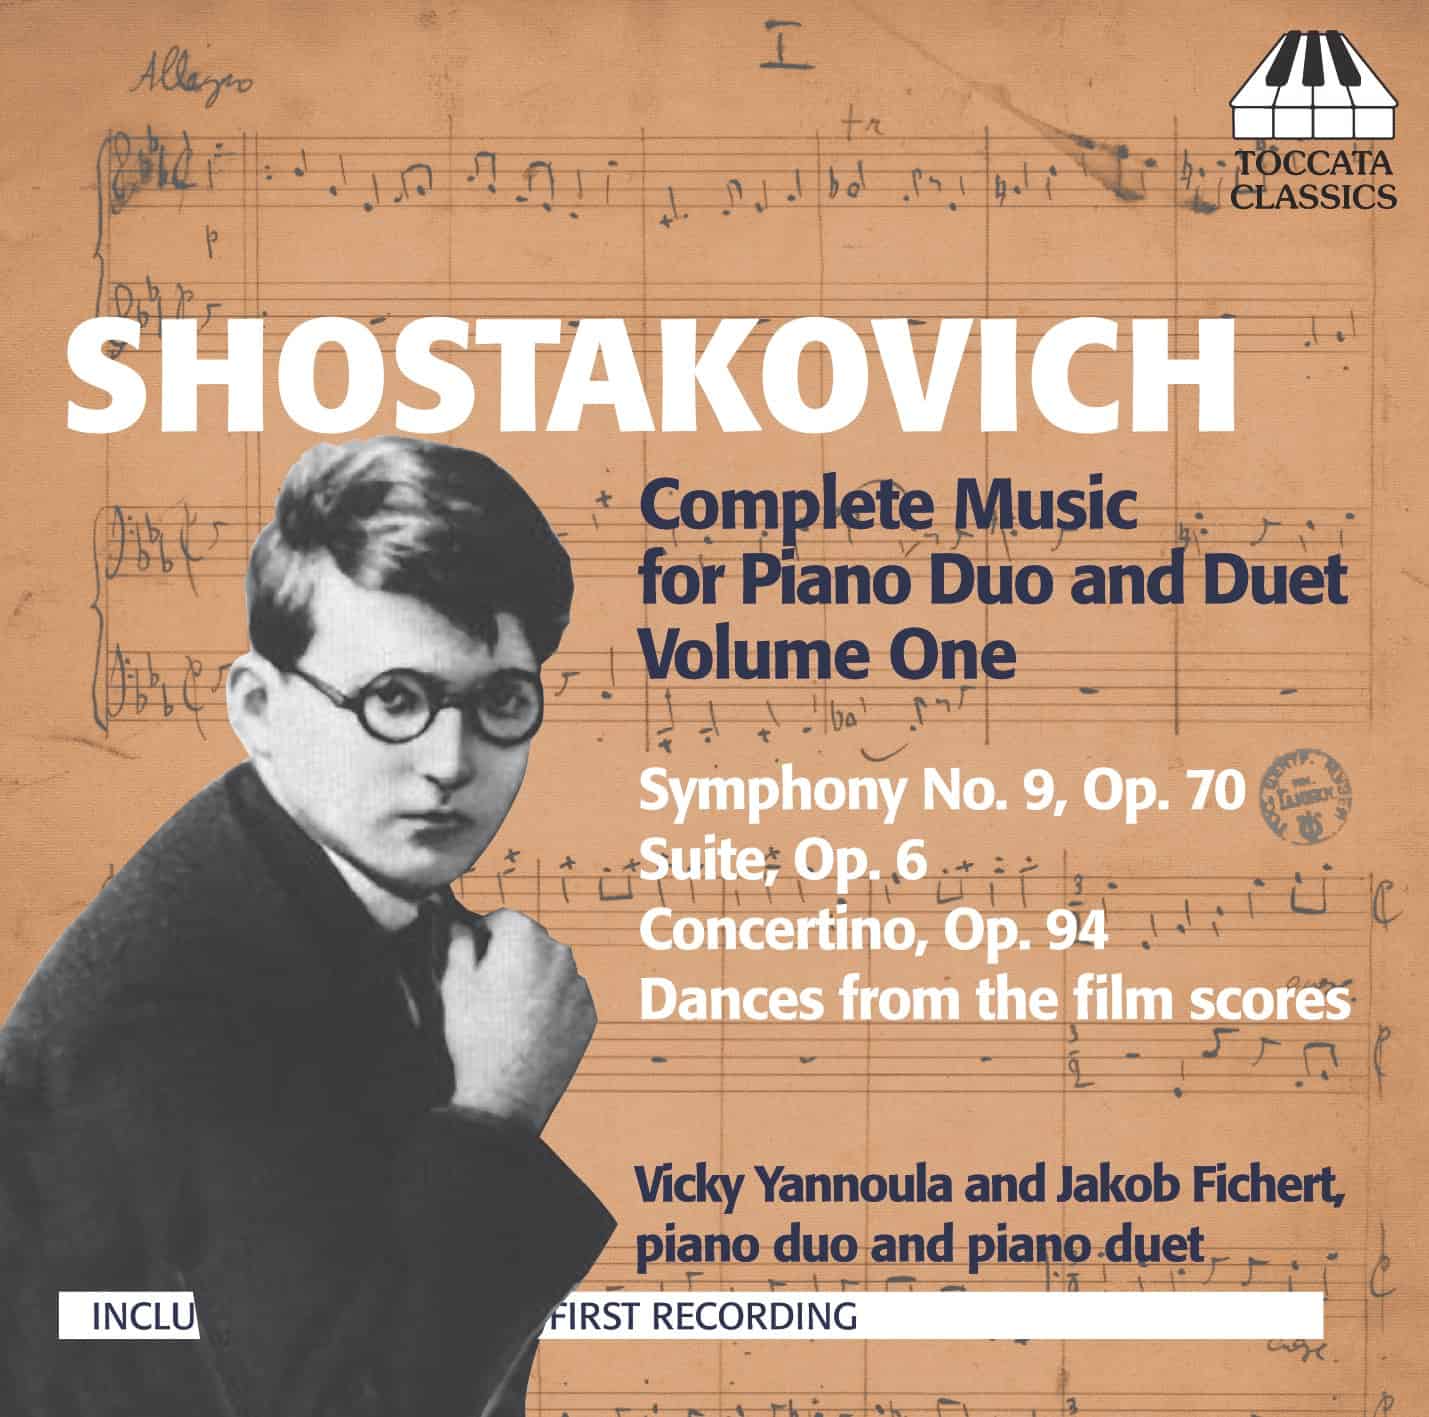 Volume　and　Duet,　Shostakovich:　Complete　Duo　Piano　Music　for　One